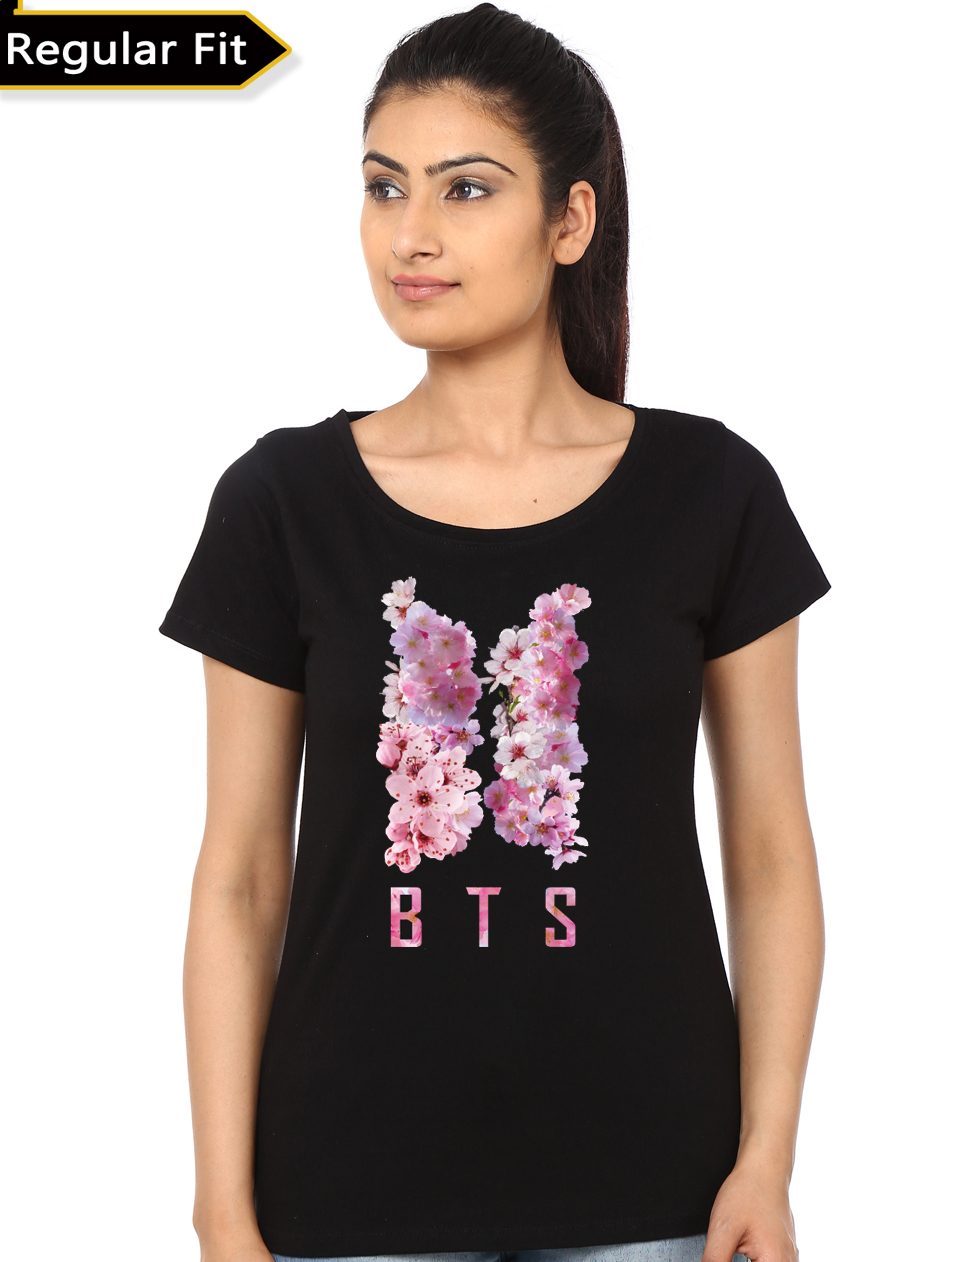 Buy STYLECAT Forever Bangtan Boys Merchandise - BTS Logo Doodle - Printed  Cotton Round Neck T-Shirt | Graphic Printing (Color - Black) | Jimin  Jungkook and J-Hope | (Size - S) at Amazon.in